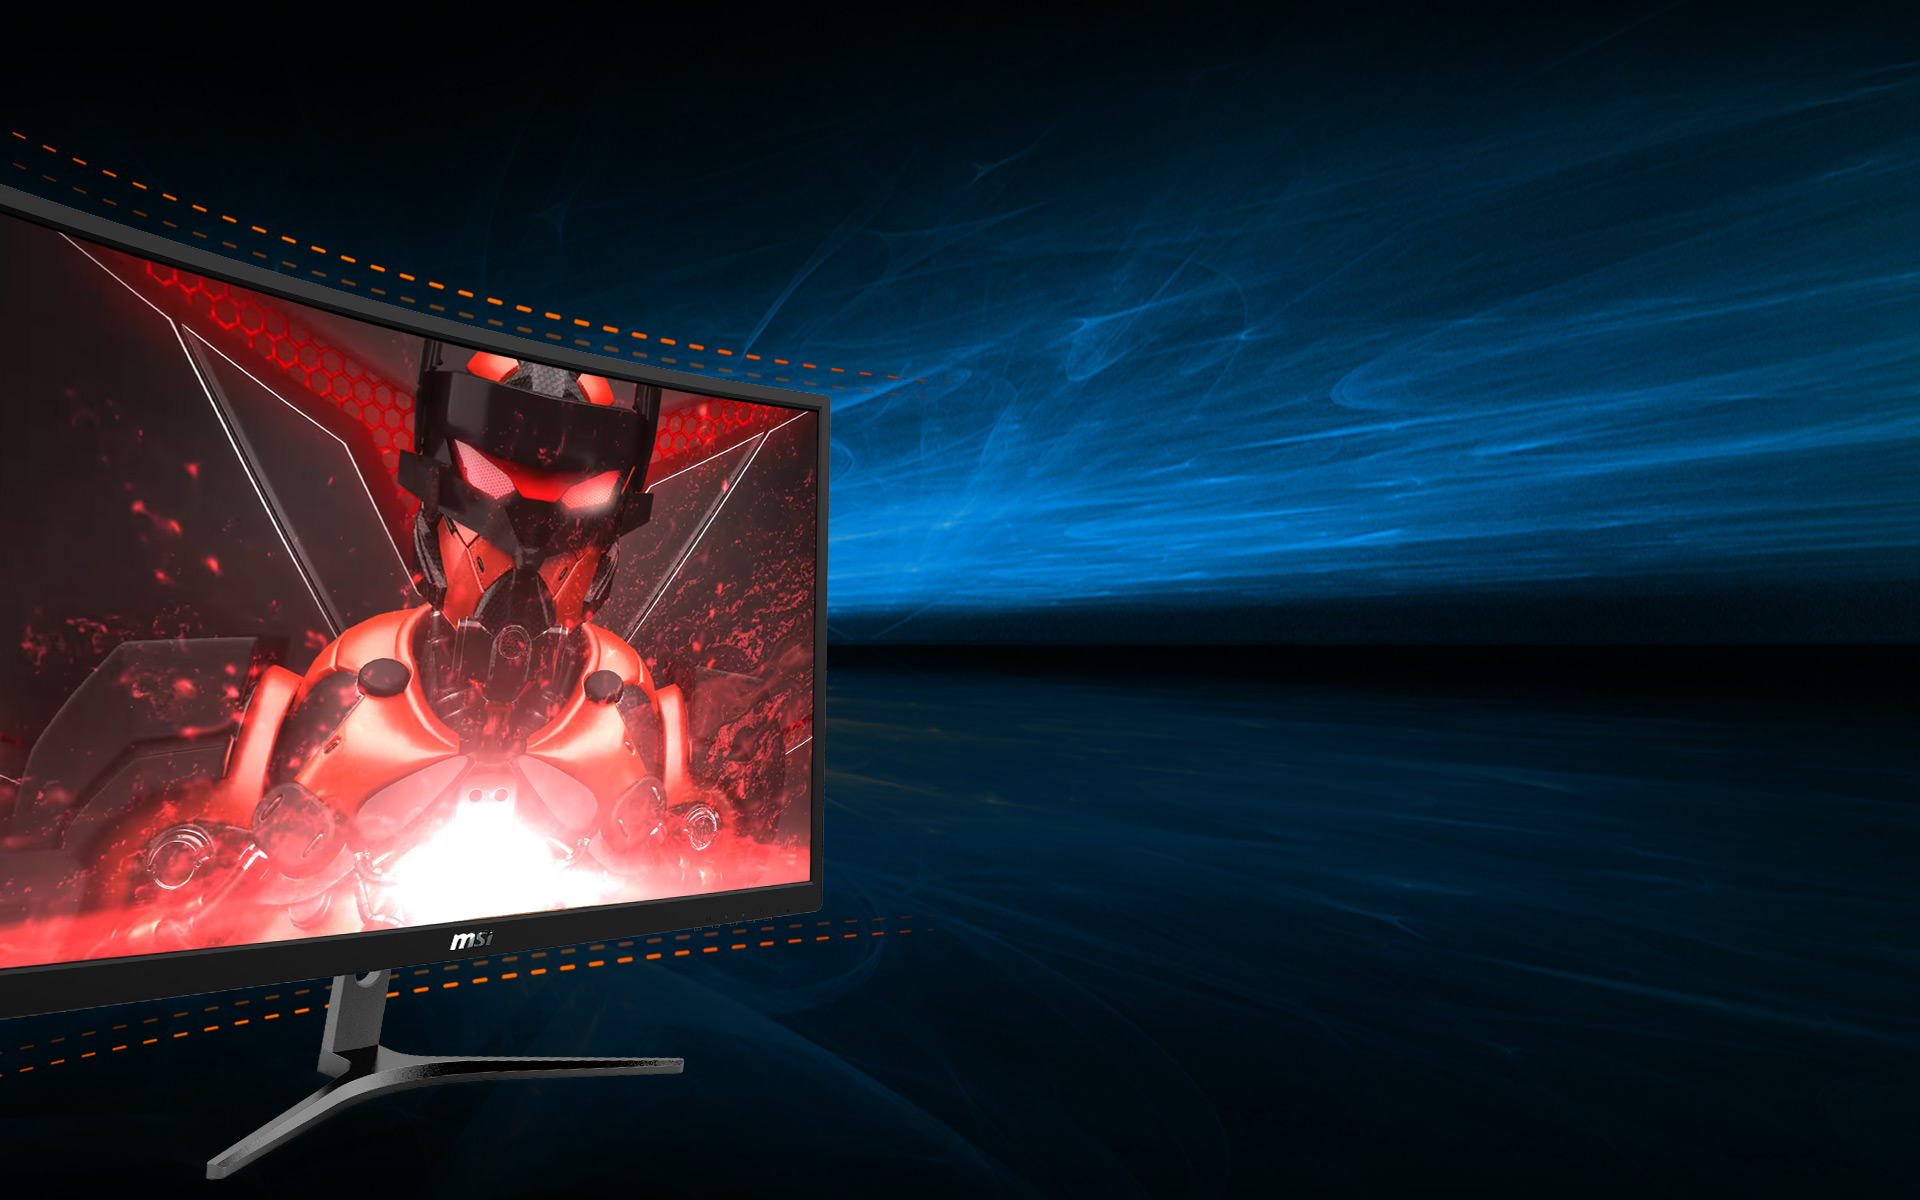 MSI G24VC monitor angled to the right showing a red-fluid infused robot